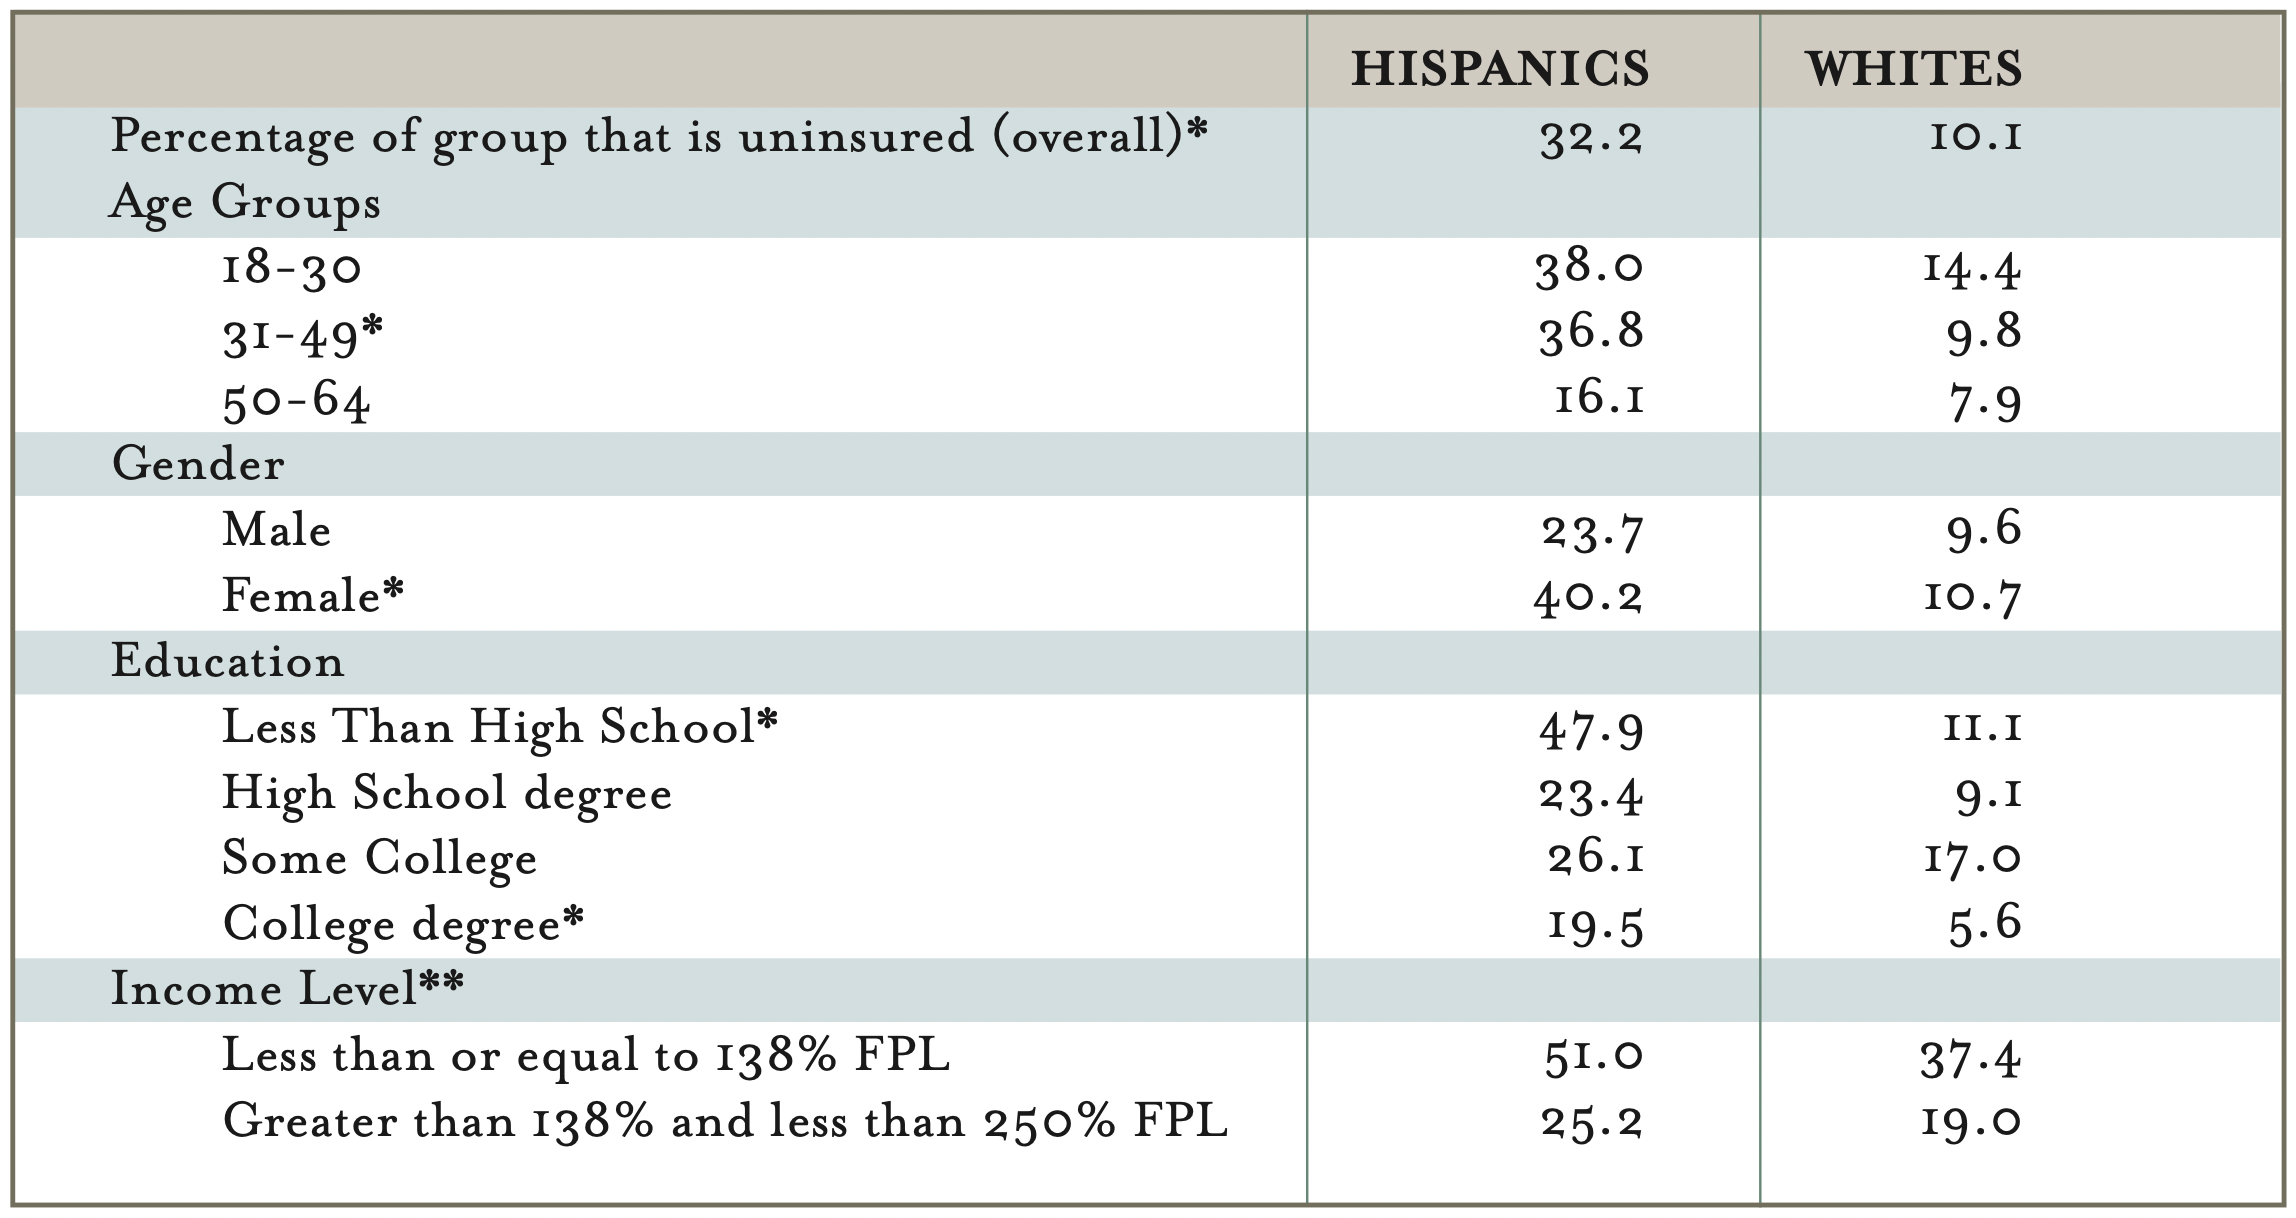 This table compares uninsured rates and the demographics of the Hispanic and white populations.